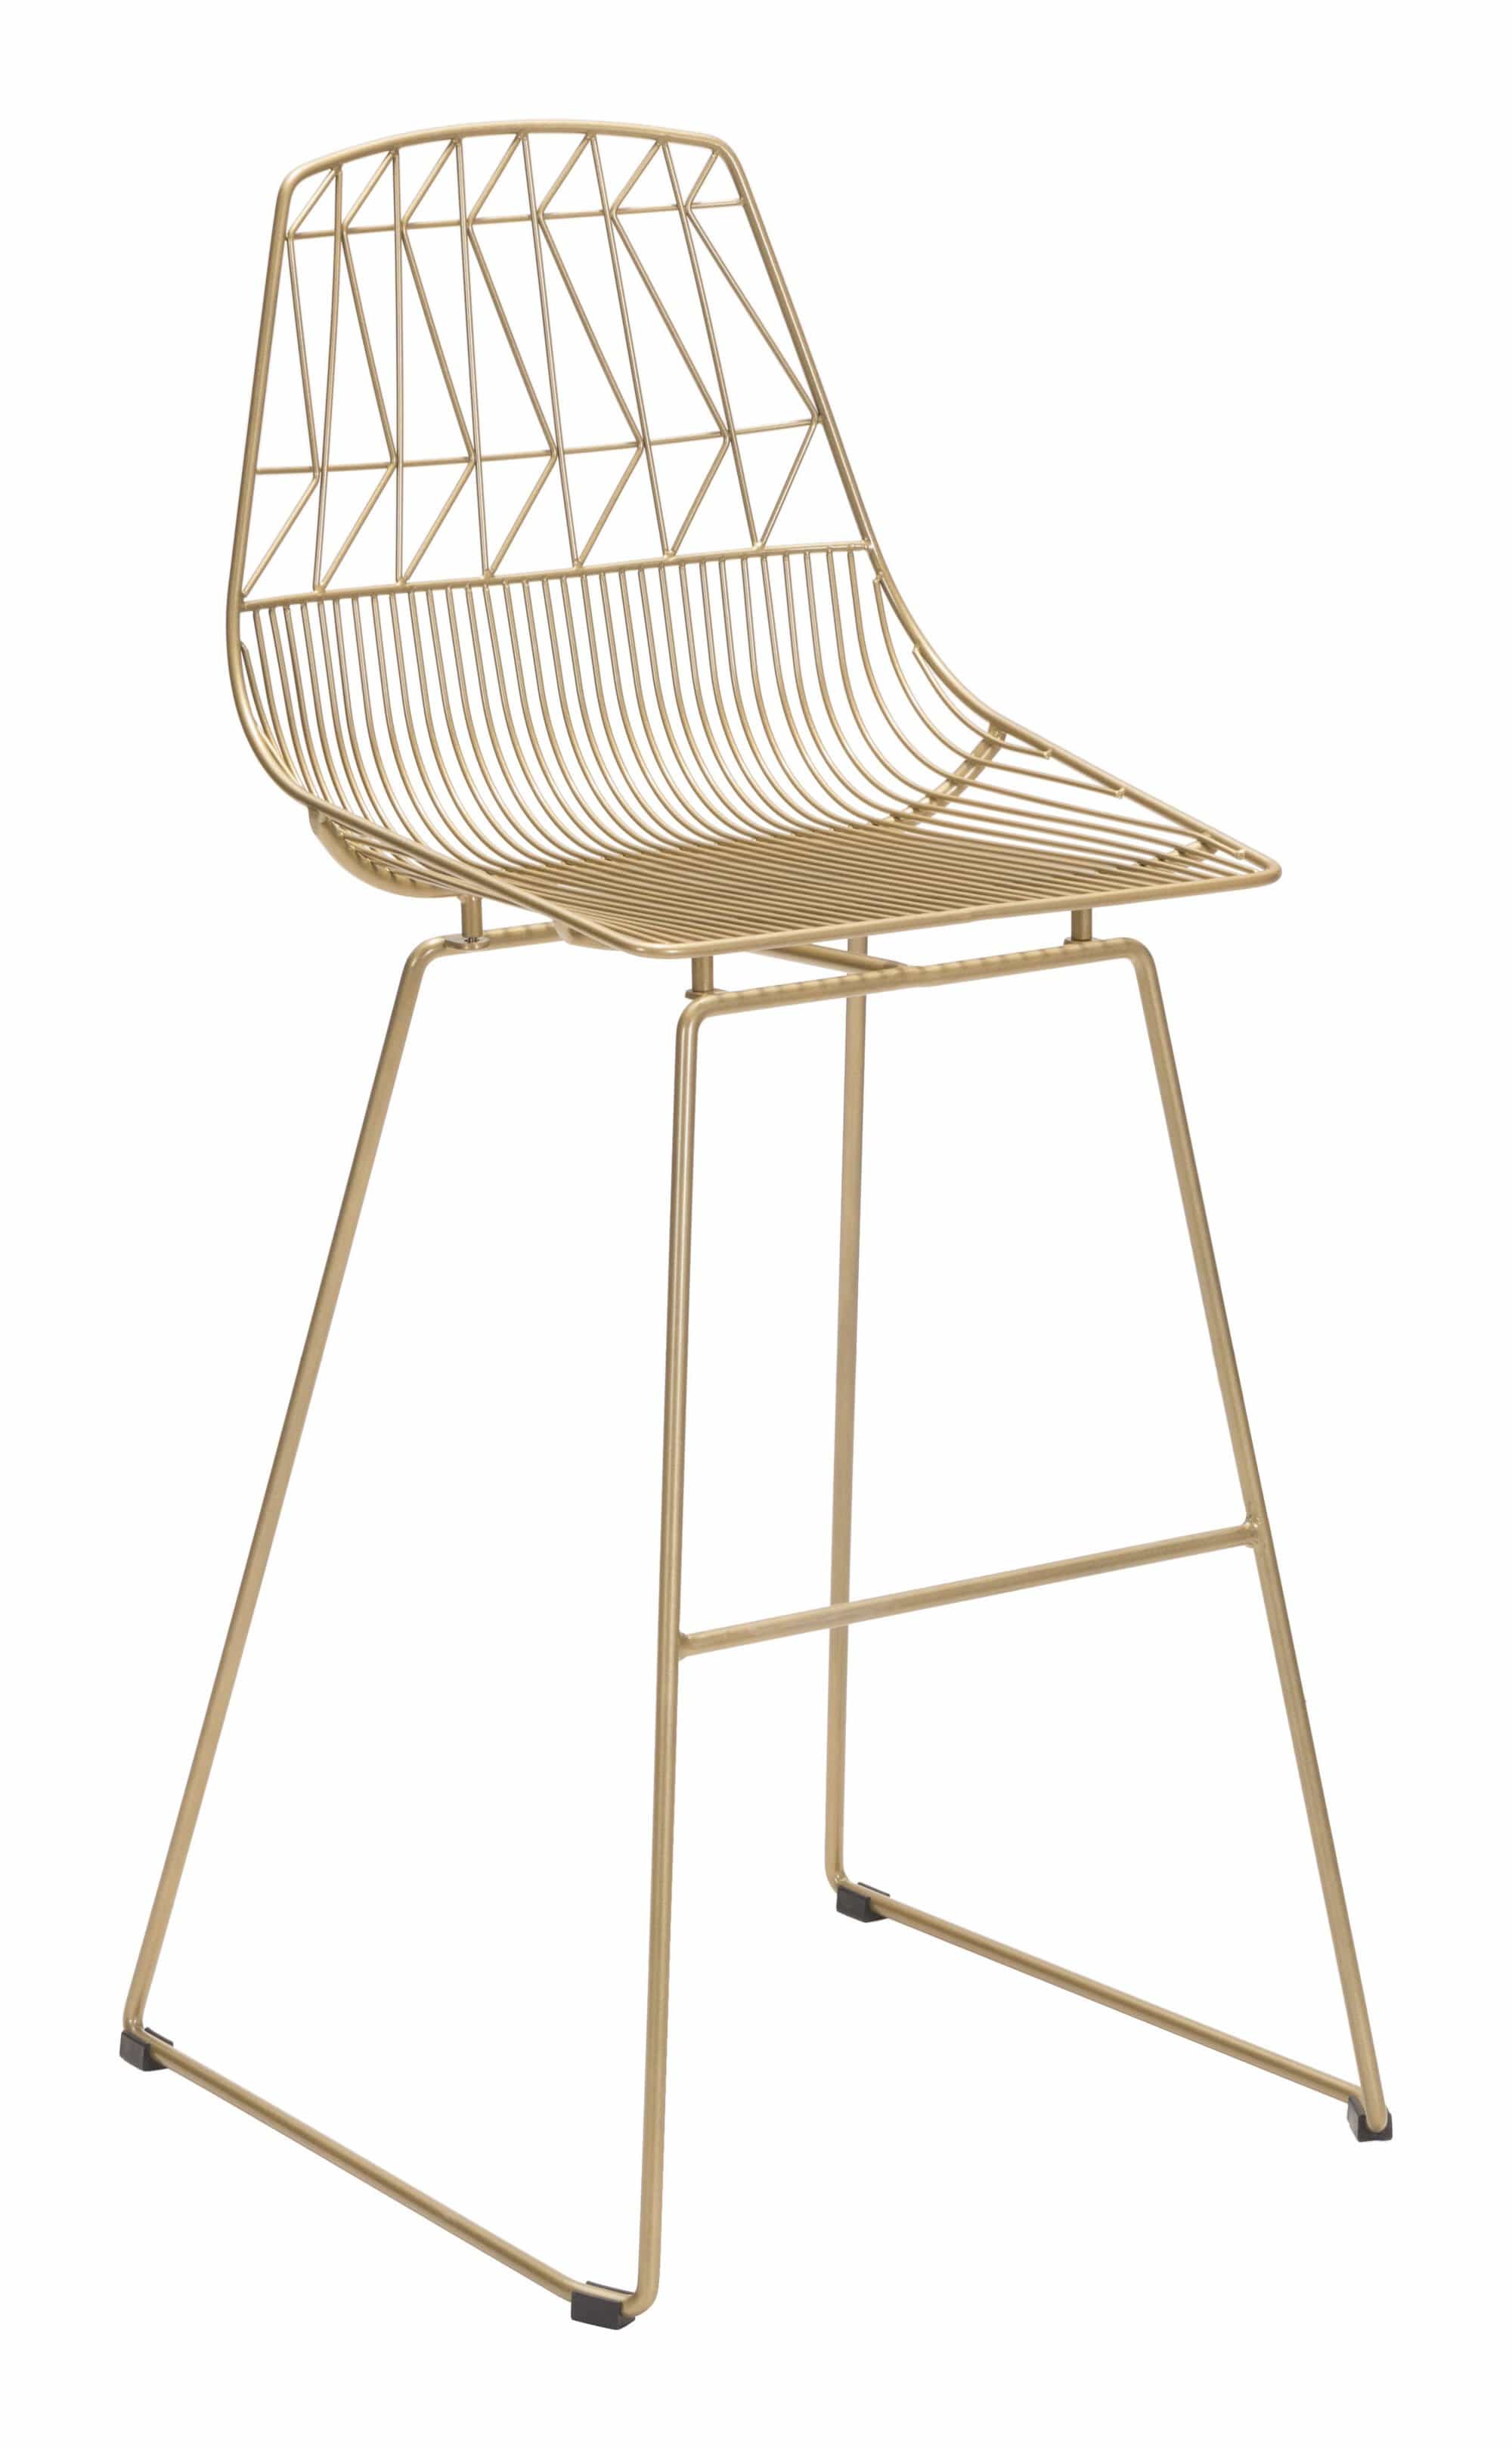 HomeRoots Outdoors Outdoor Chairs Gold / Steel 22" x 22" x 43.5" Gold, Steel, Bar Chair - Set of 2